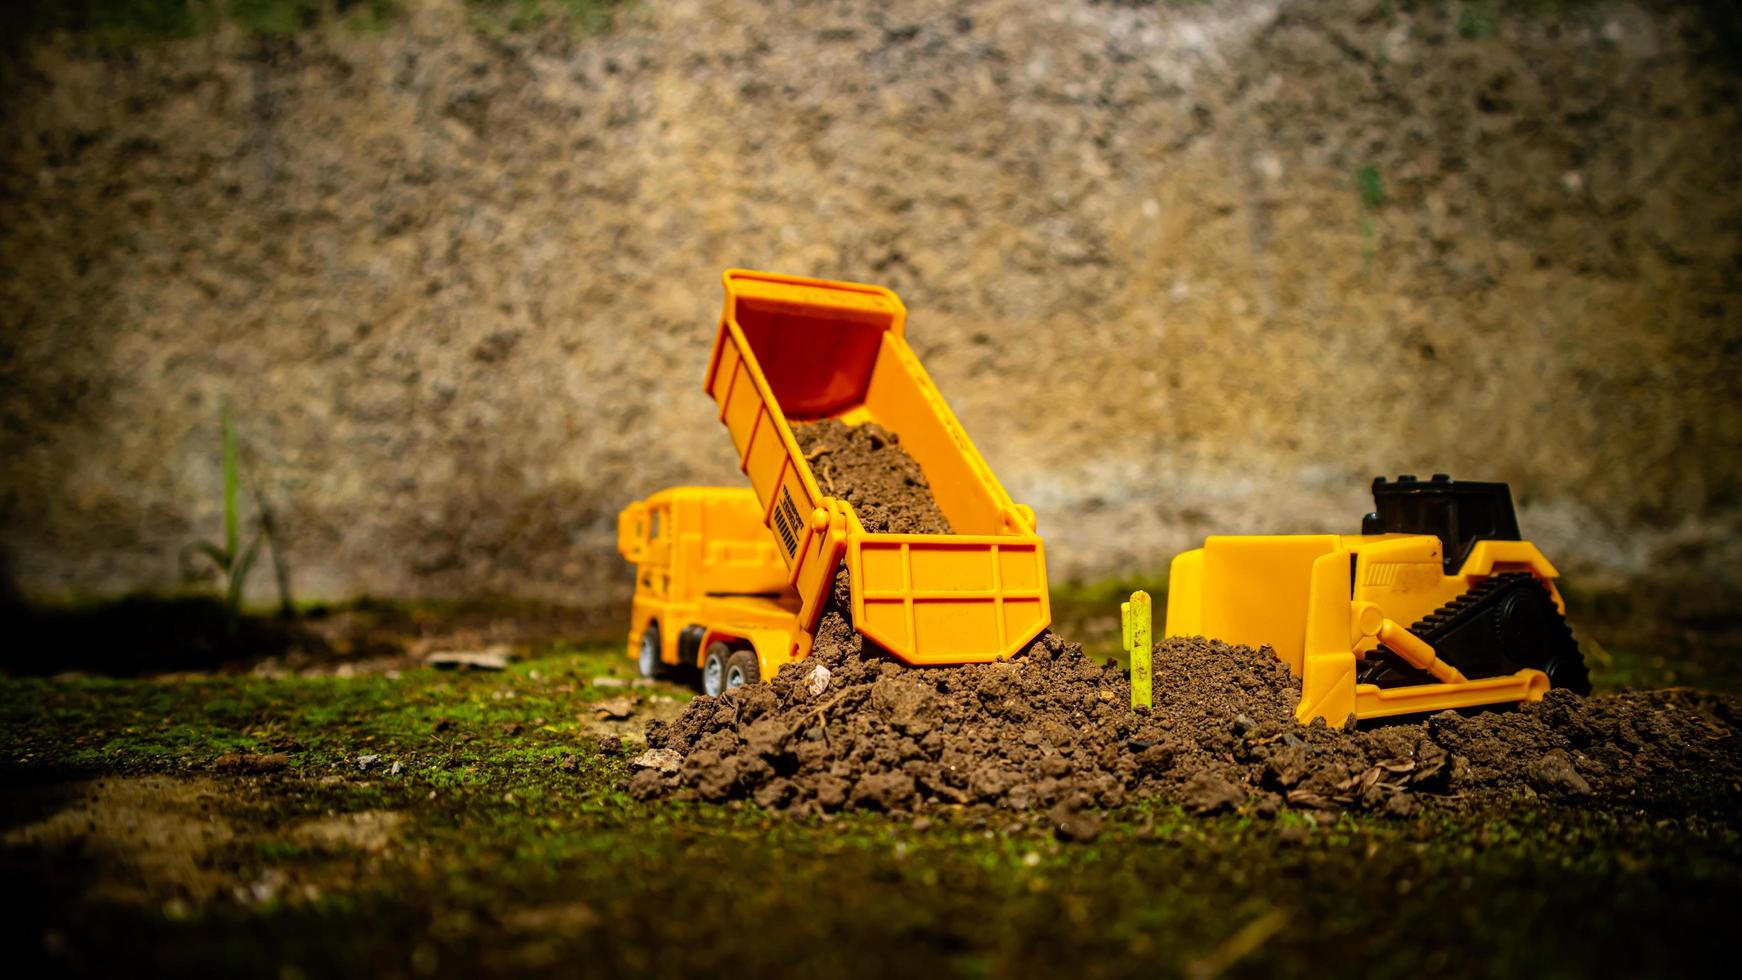 South Minahasa, Indonesia  January 2023, a yellow dump truck toy transporting sand photo